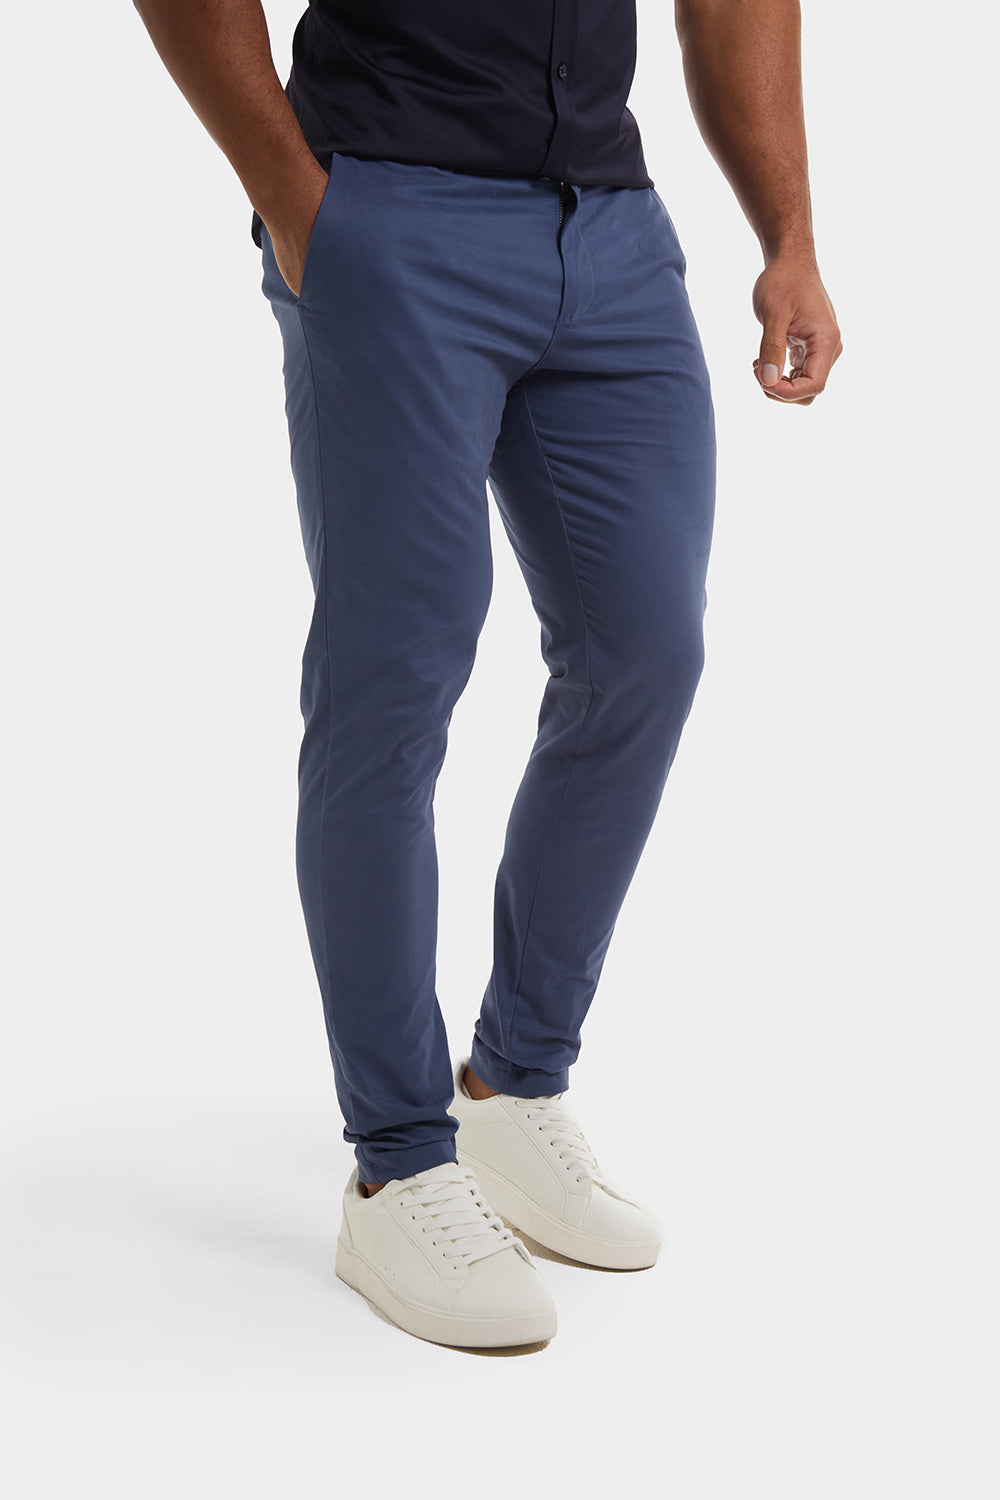 Muscle Fit Chino Trouser in Airforce - TAILORED ATHLETE - ROW